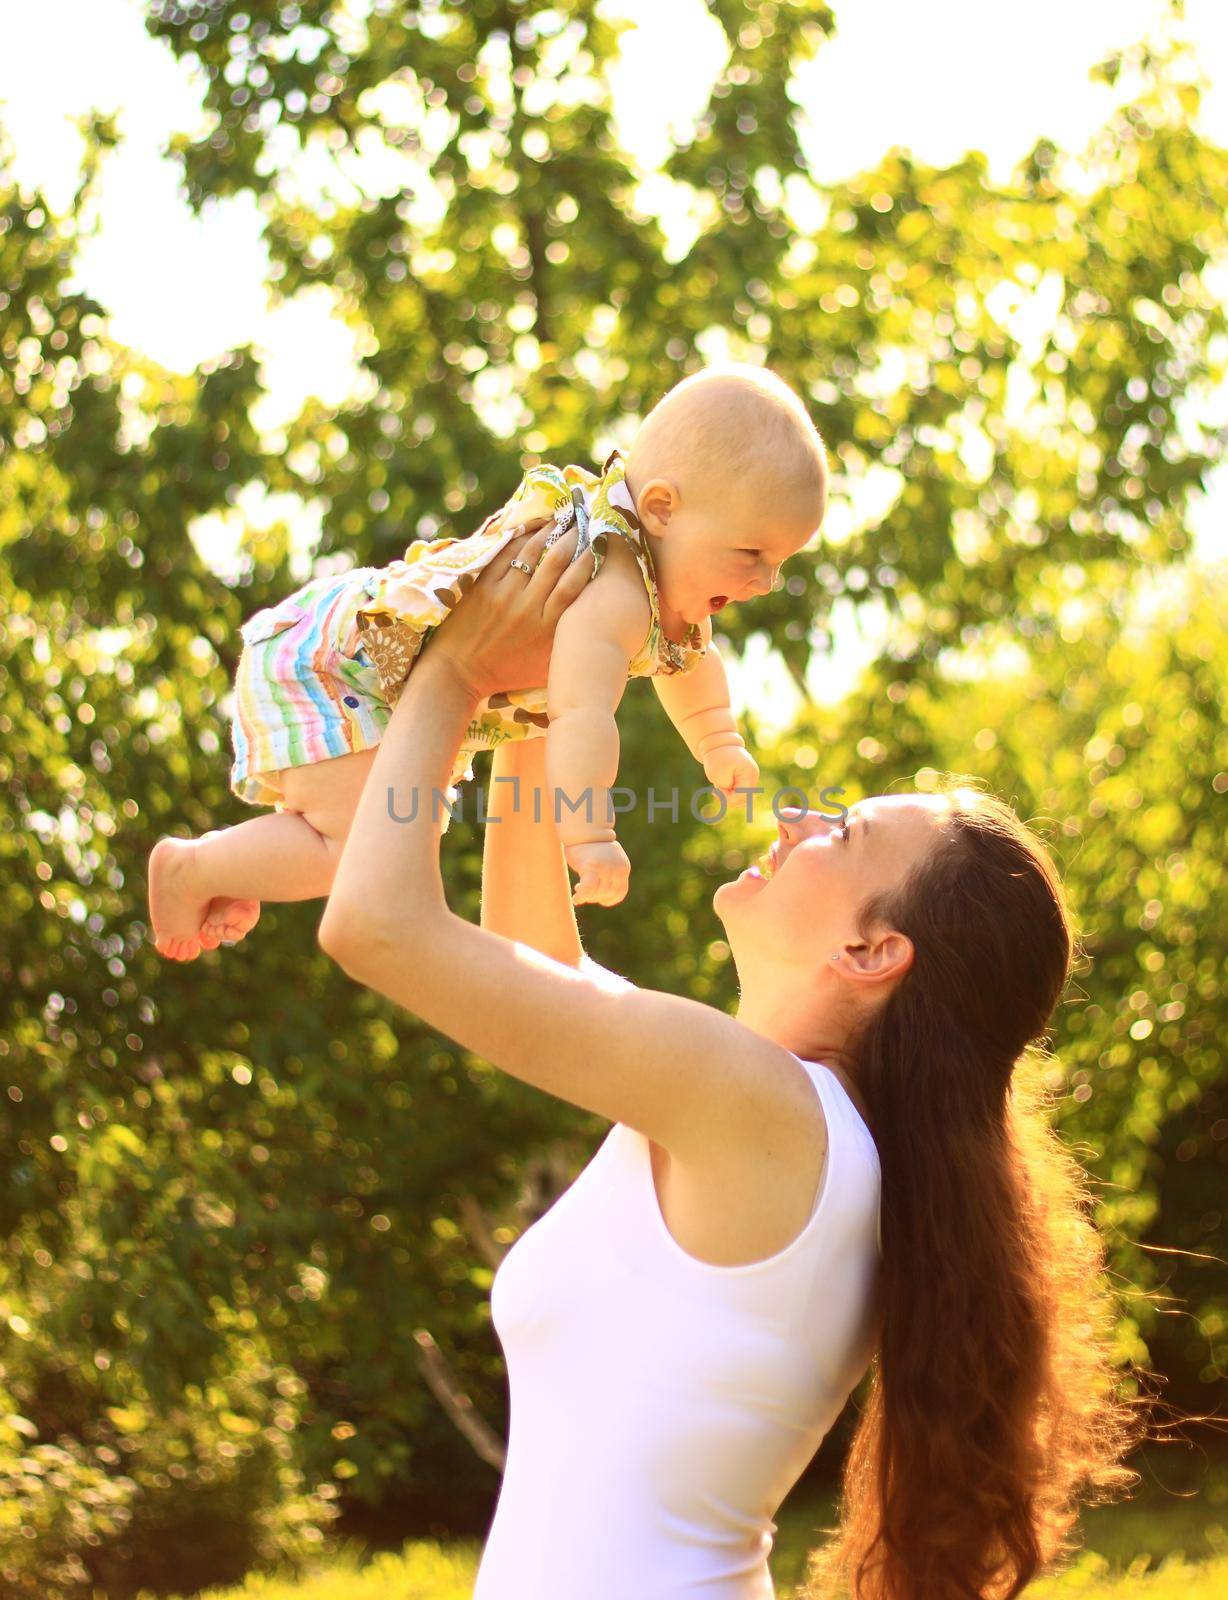 Beautiful Mother And Baby outdoors. Nature. Beauty Mum and her Child playing in Park together